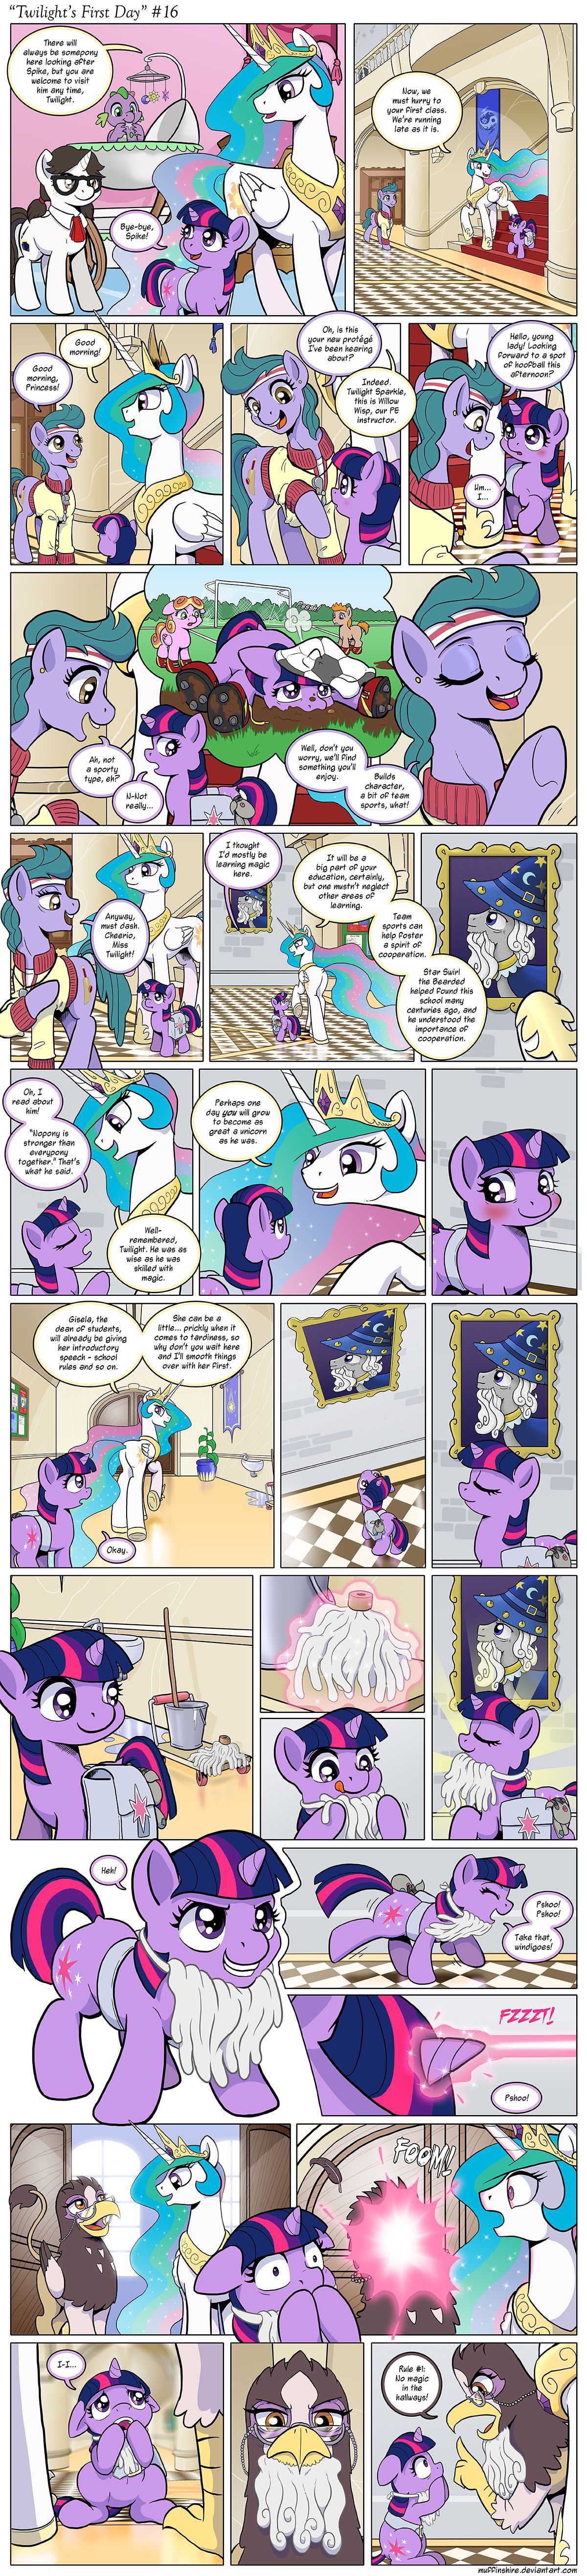 [Muffinshire] Twilight's First Day (My Little Pony: Friendship is Magic) [English] 16